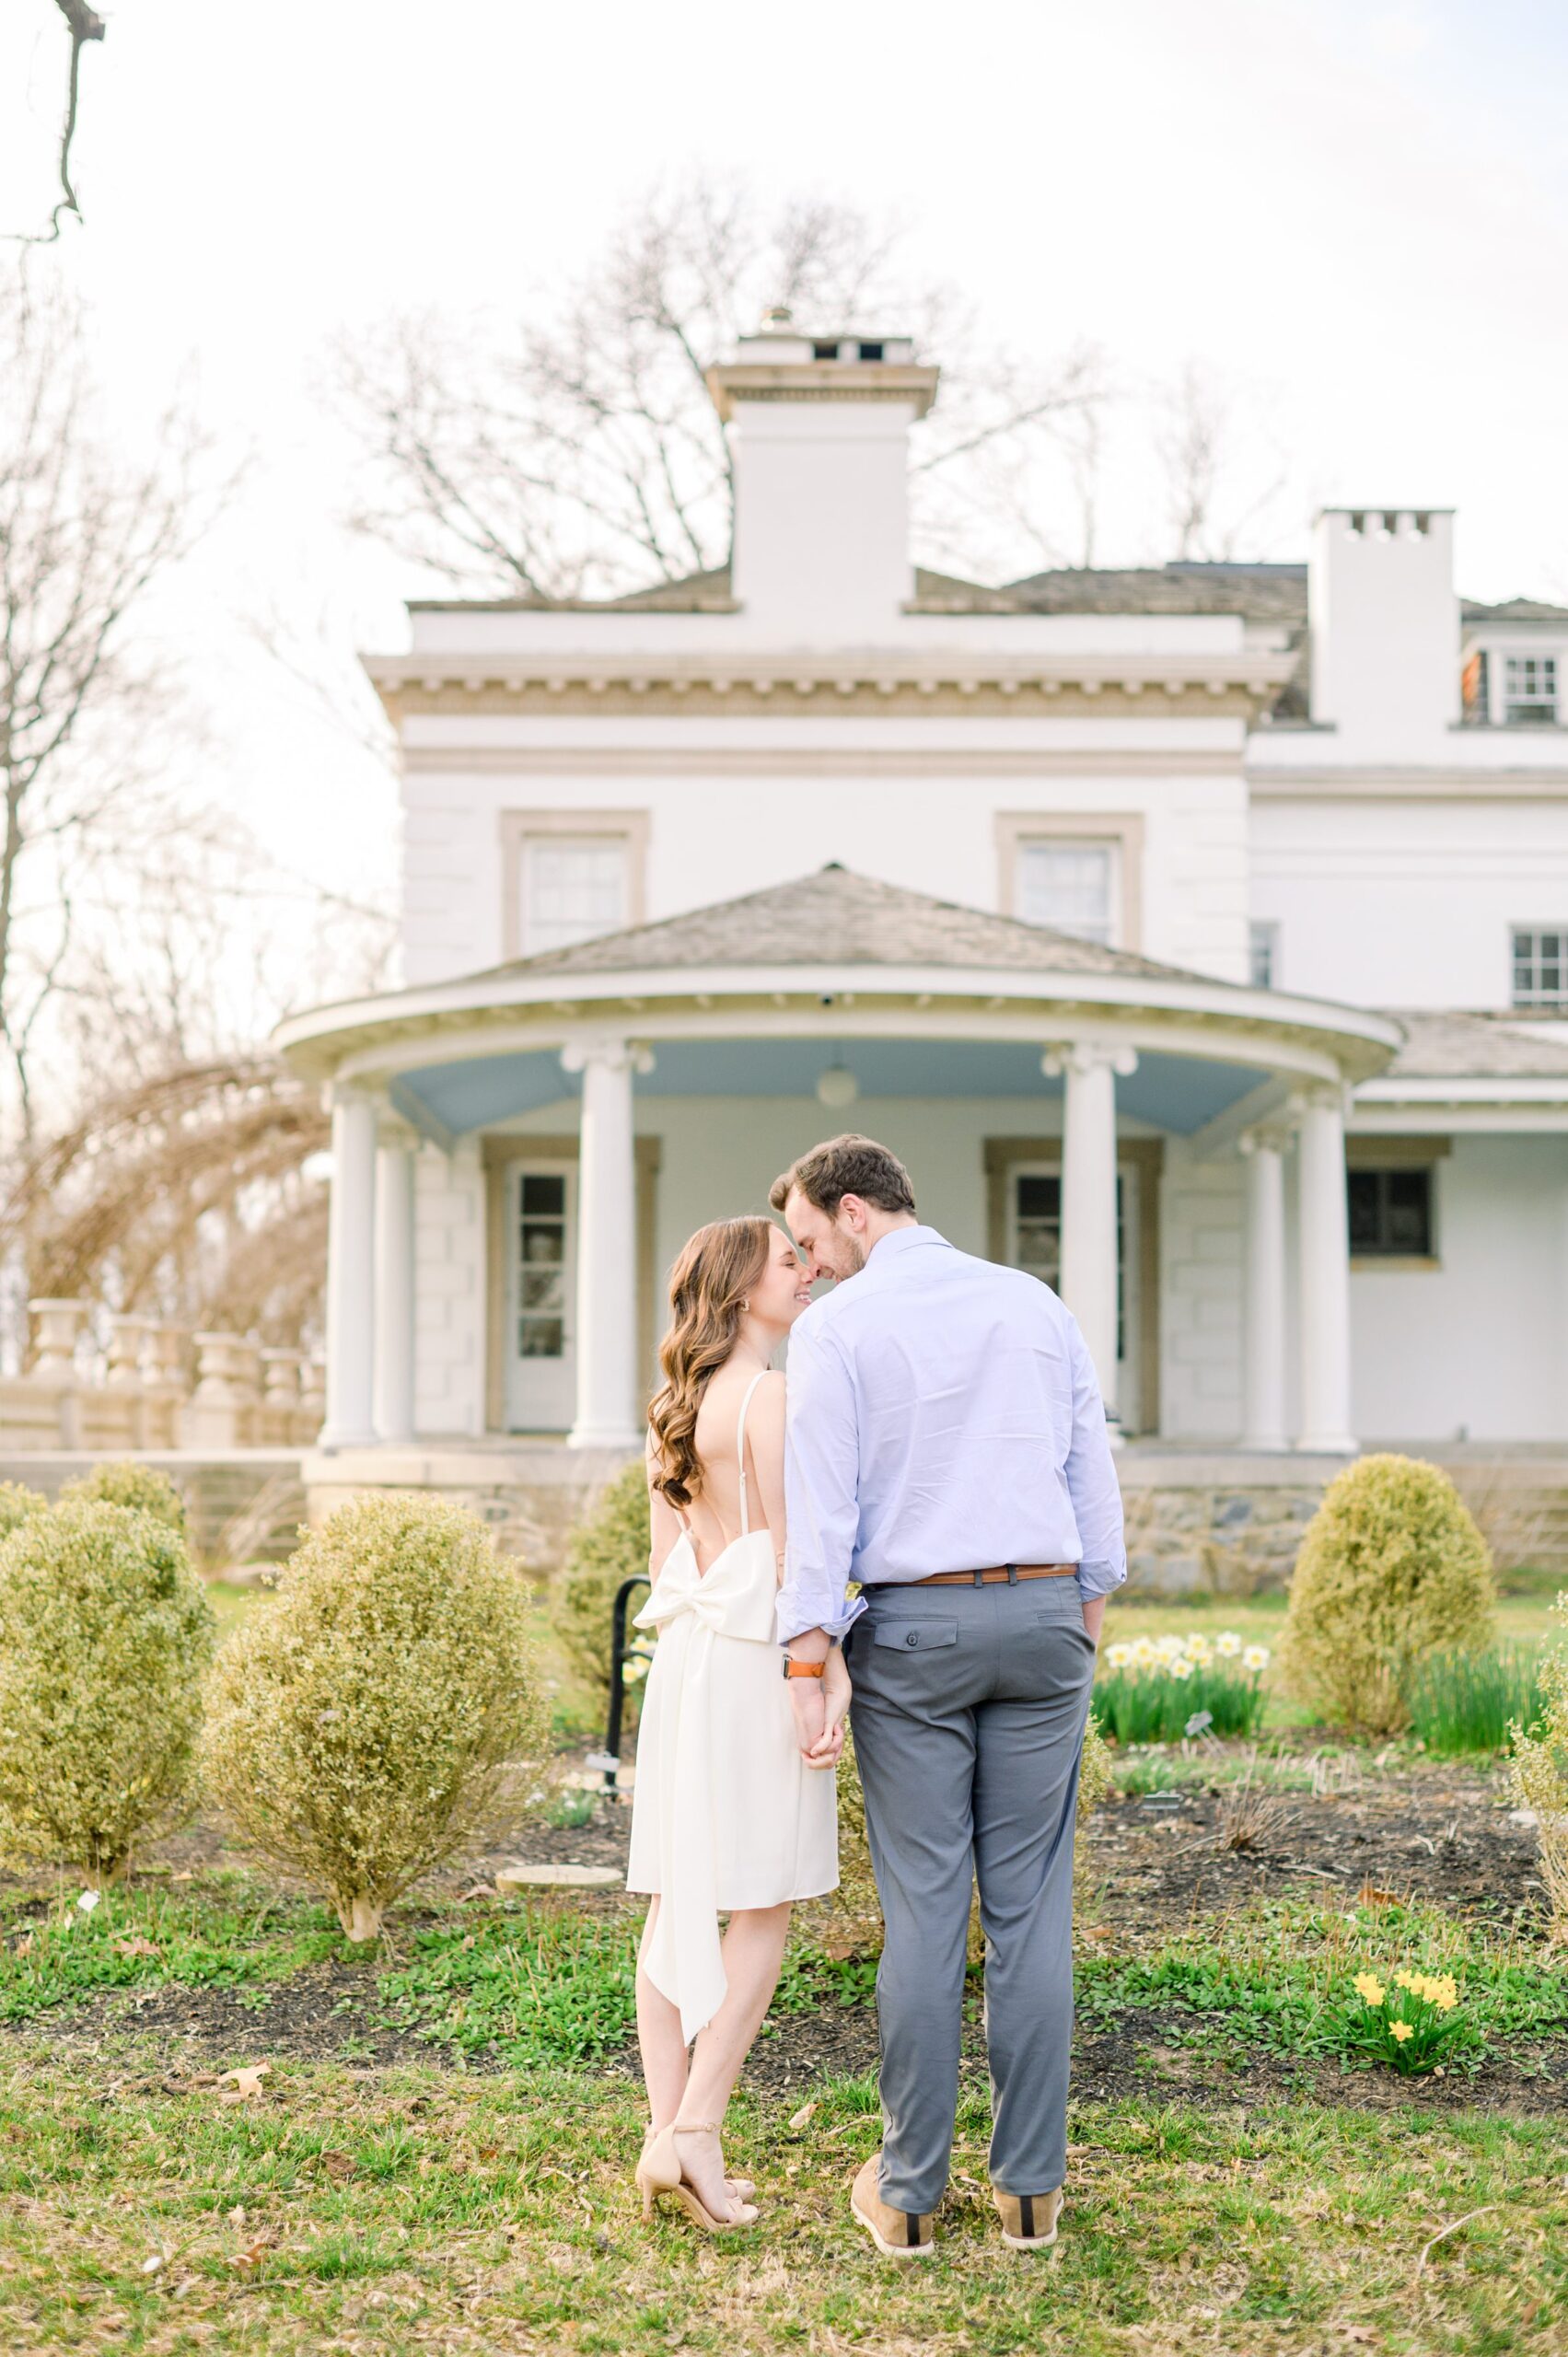 Engaged couple at Liriodendron Mansion in Bel Air, Maryland for their engagement session photographed by Baltimore Wedding Photographer Cait Kramer Photography